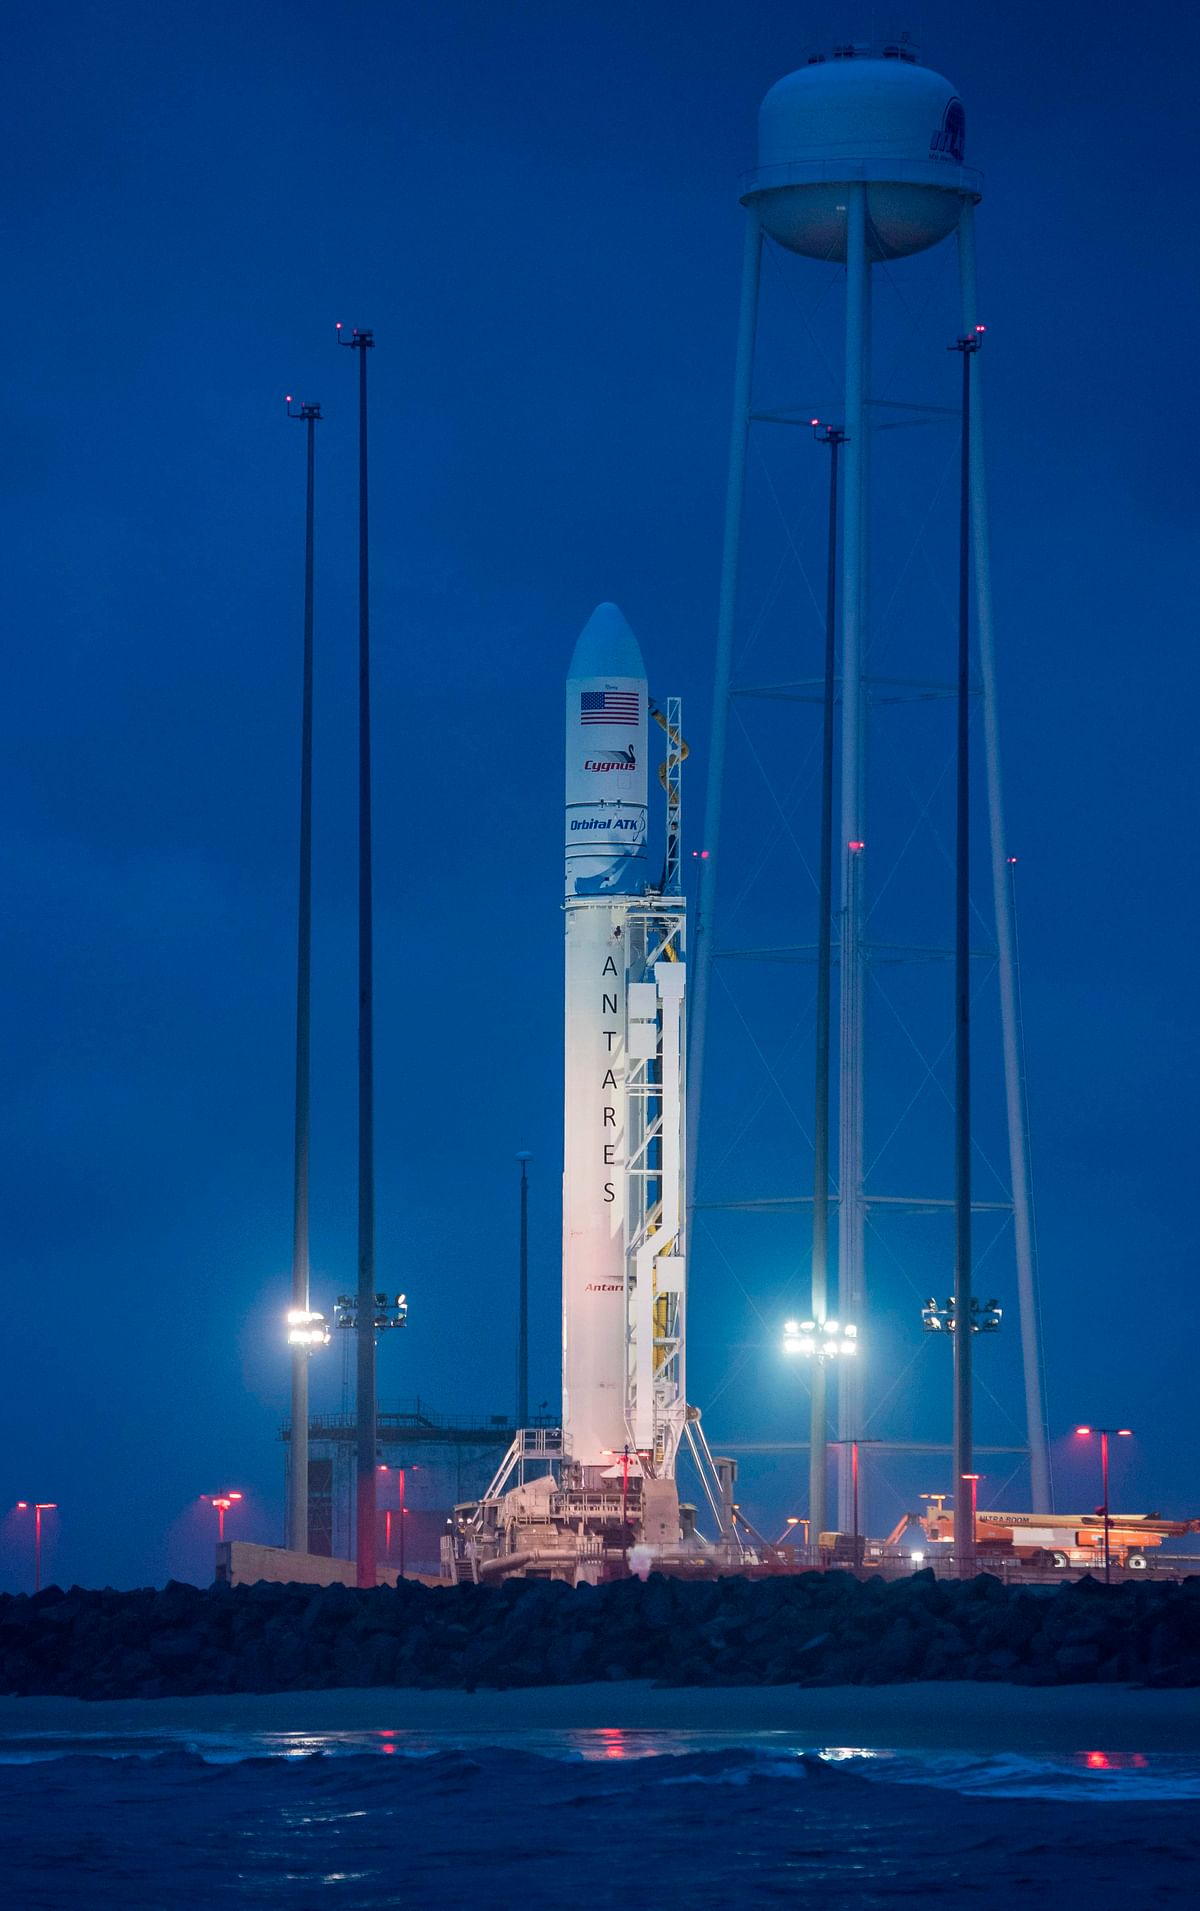 In this image released by NASA, the Orbital ATK Antares rocket, with the Cygnus spacecraft onboard, is seen at launch Pad-0A, on 20 May 2018 at Wallops Flight Facility in Virginia. Photo: Collected